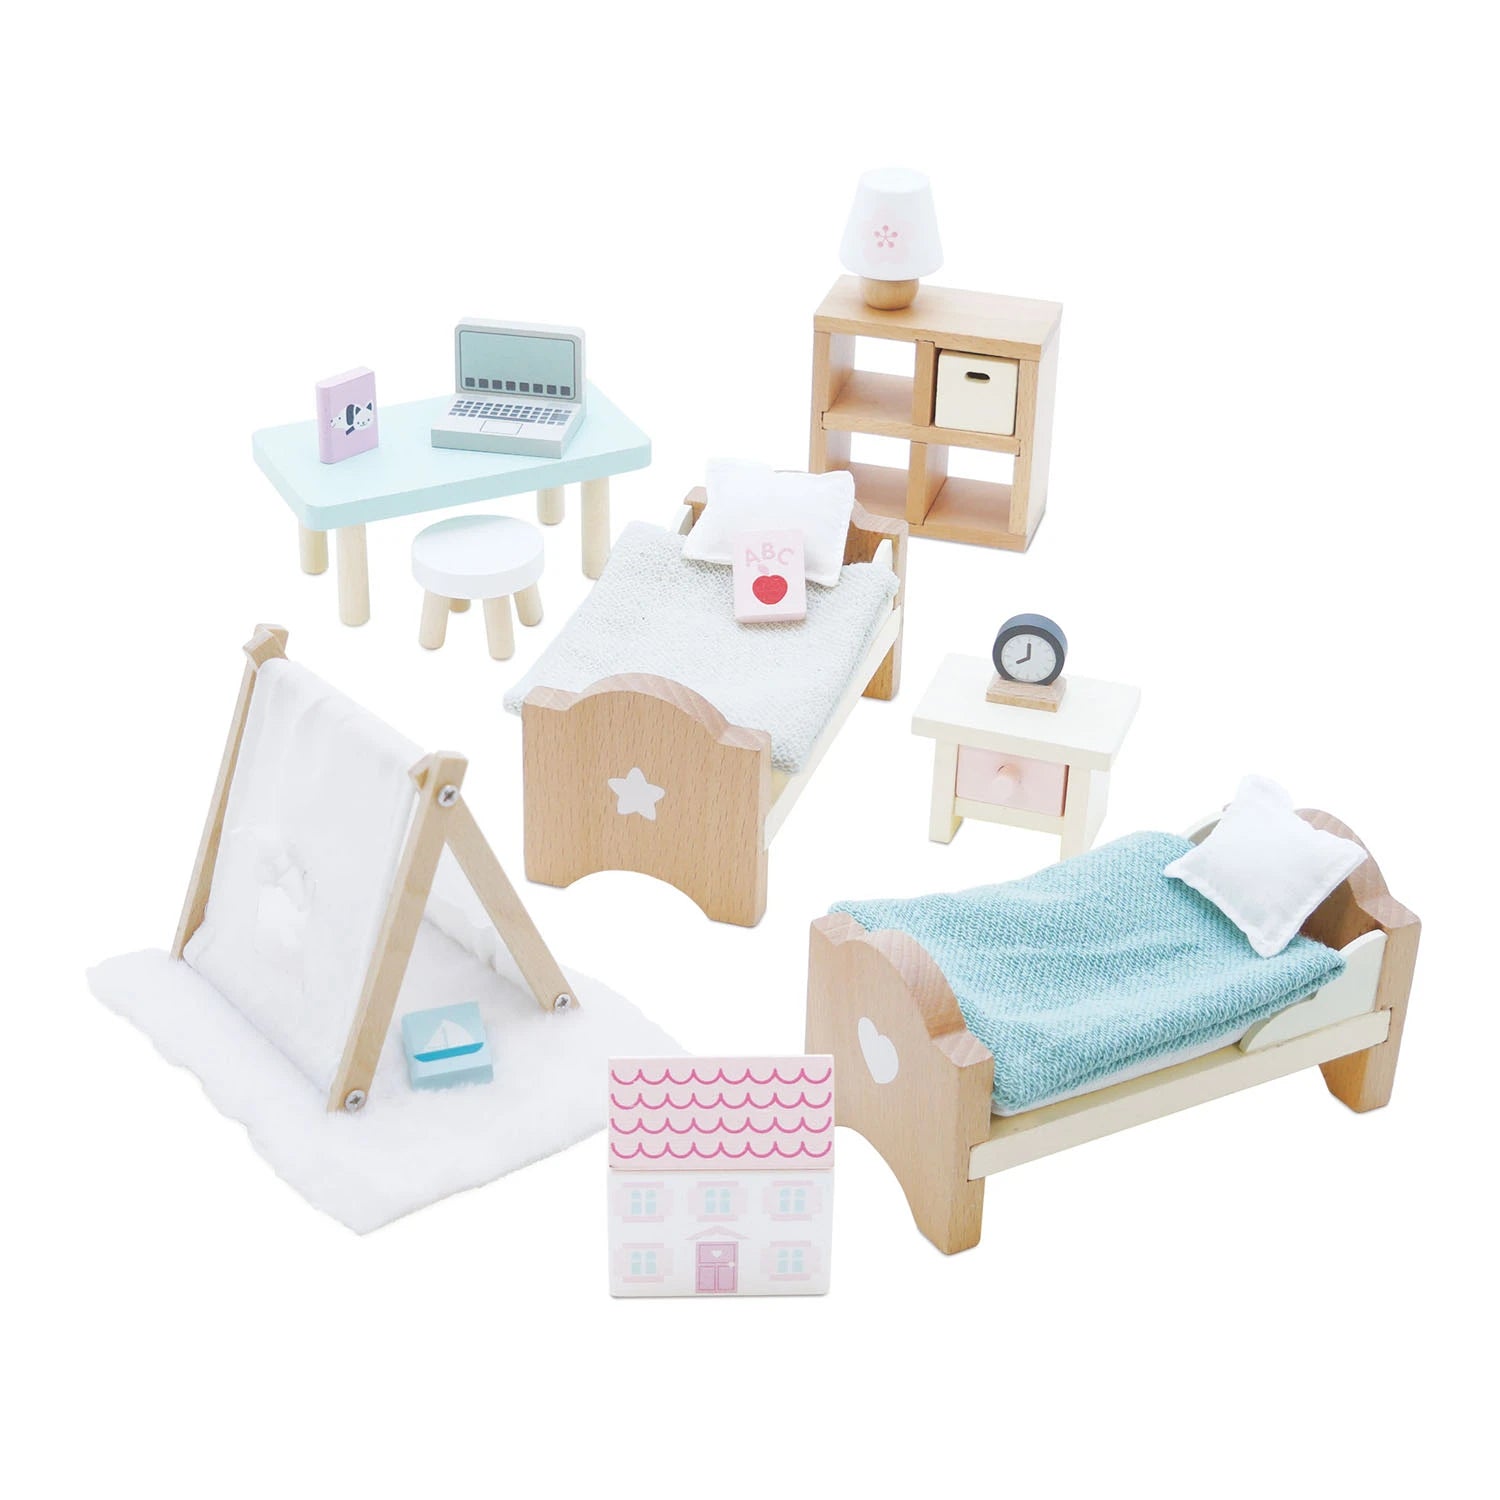 An image of Wooden Dolls House Bedroom Furniture Set - 24 Piece | Shop Now